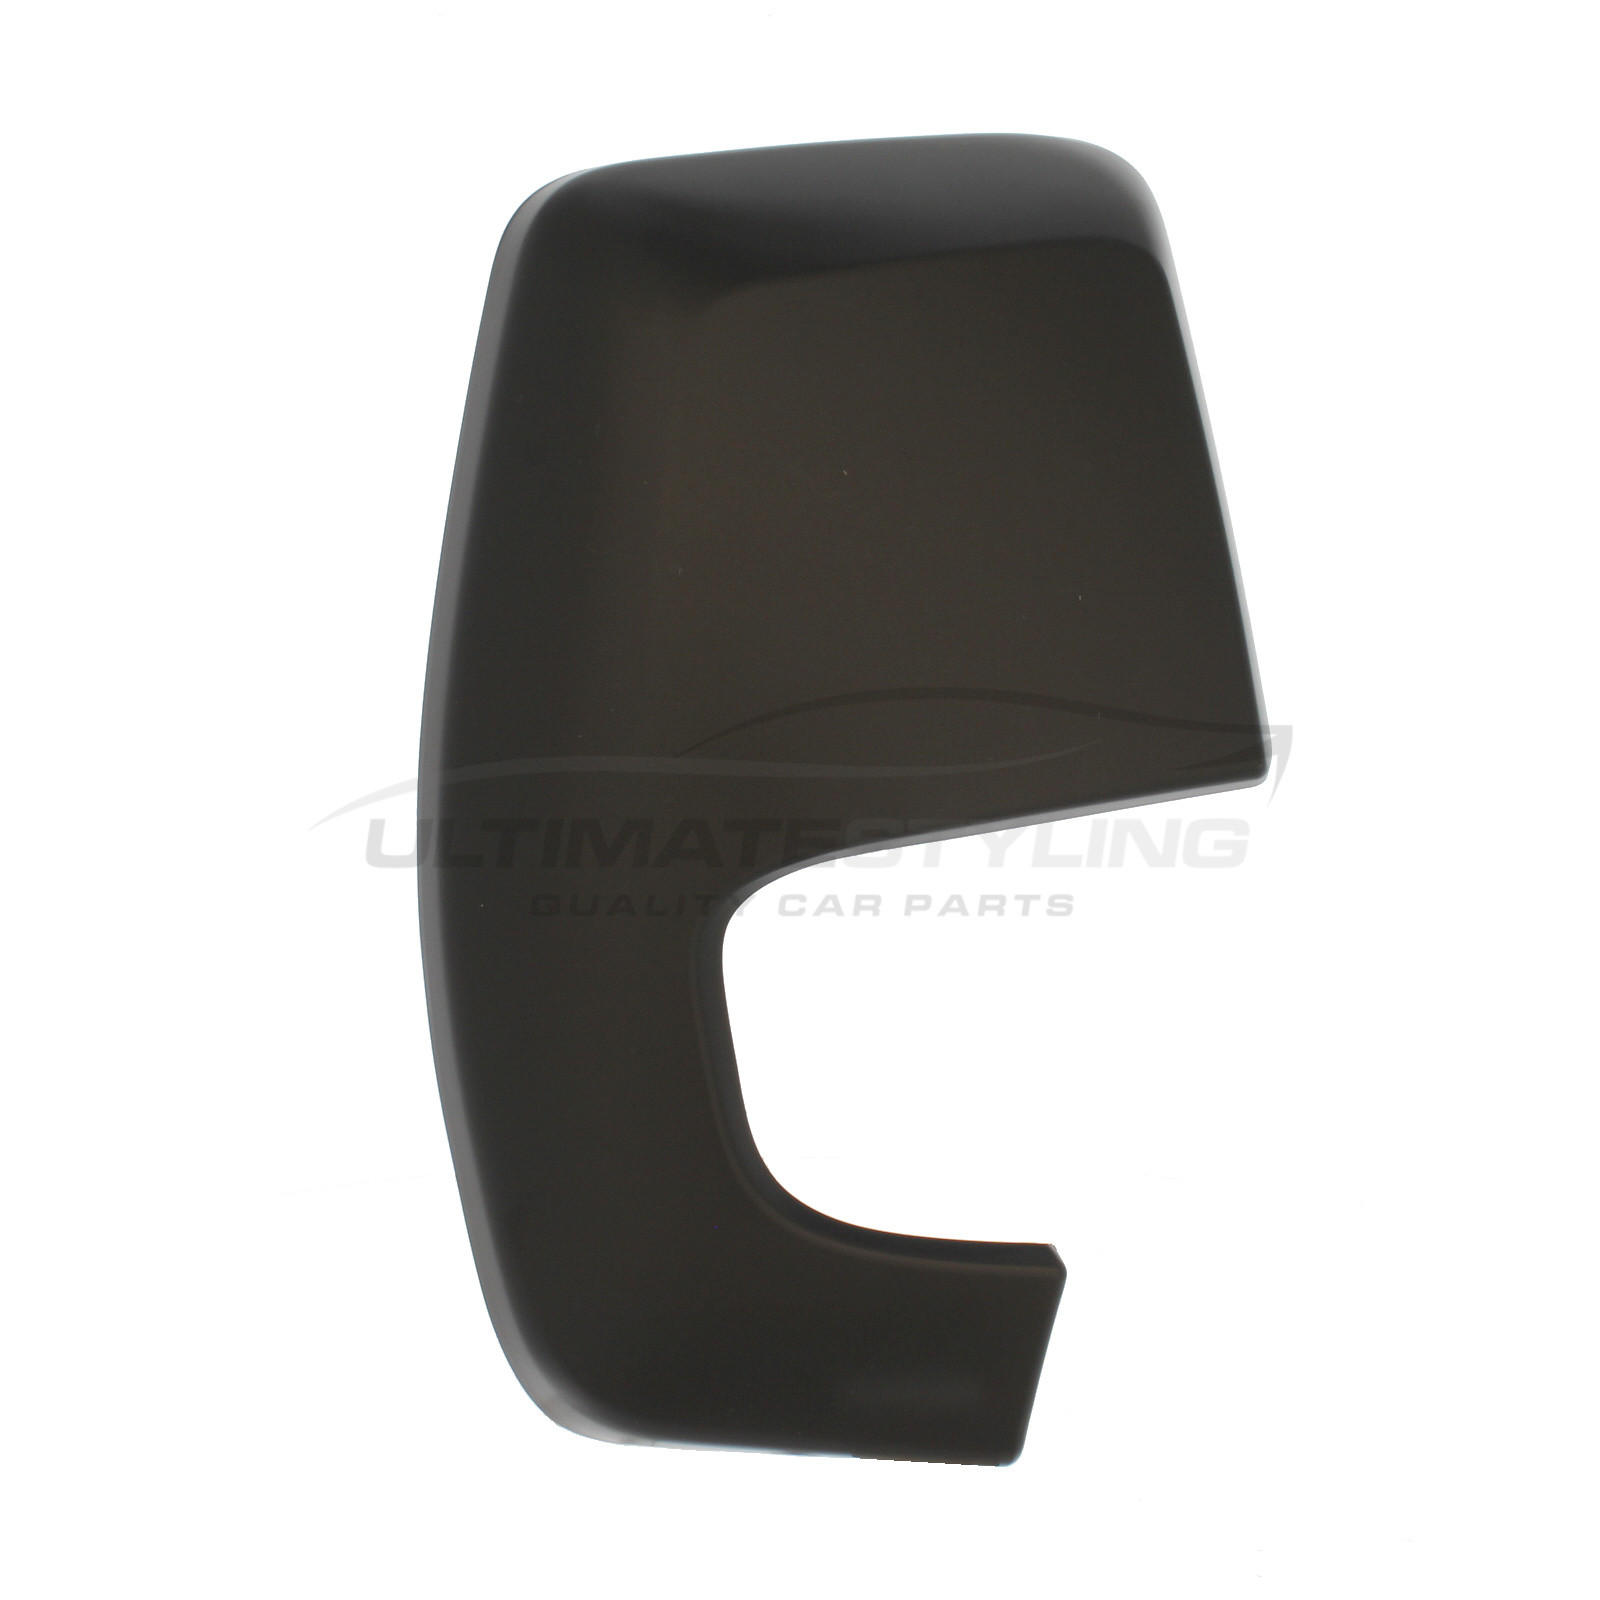 Ford Tourneo Custom 2012->, Ford Transit Custom 2012-> Wing Mirror Cover Cap Casing Black (Textured) Drivers Side (RH)